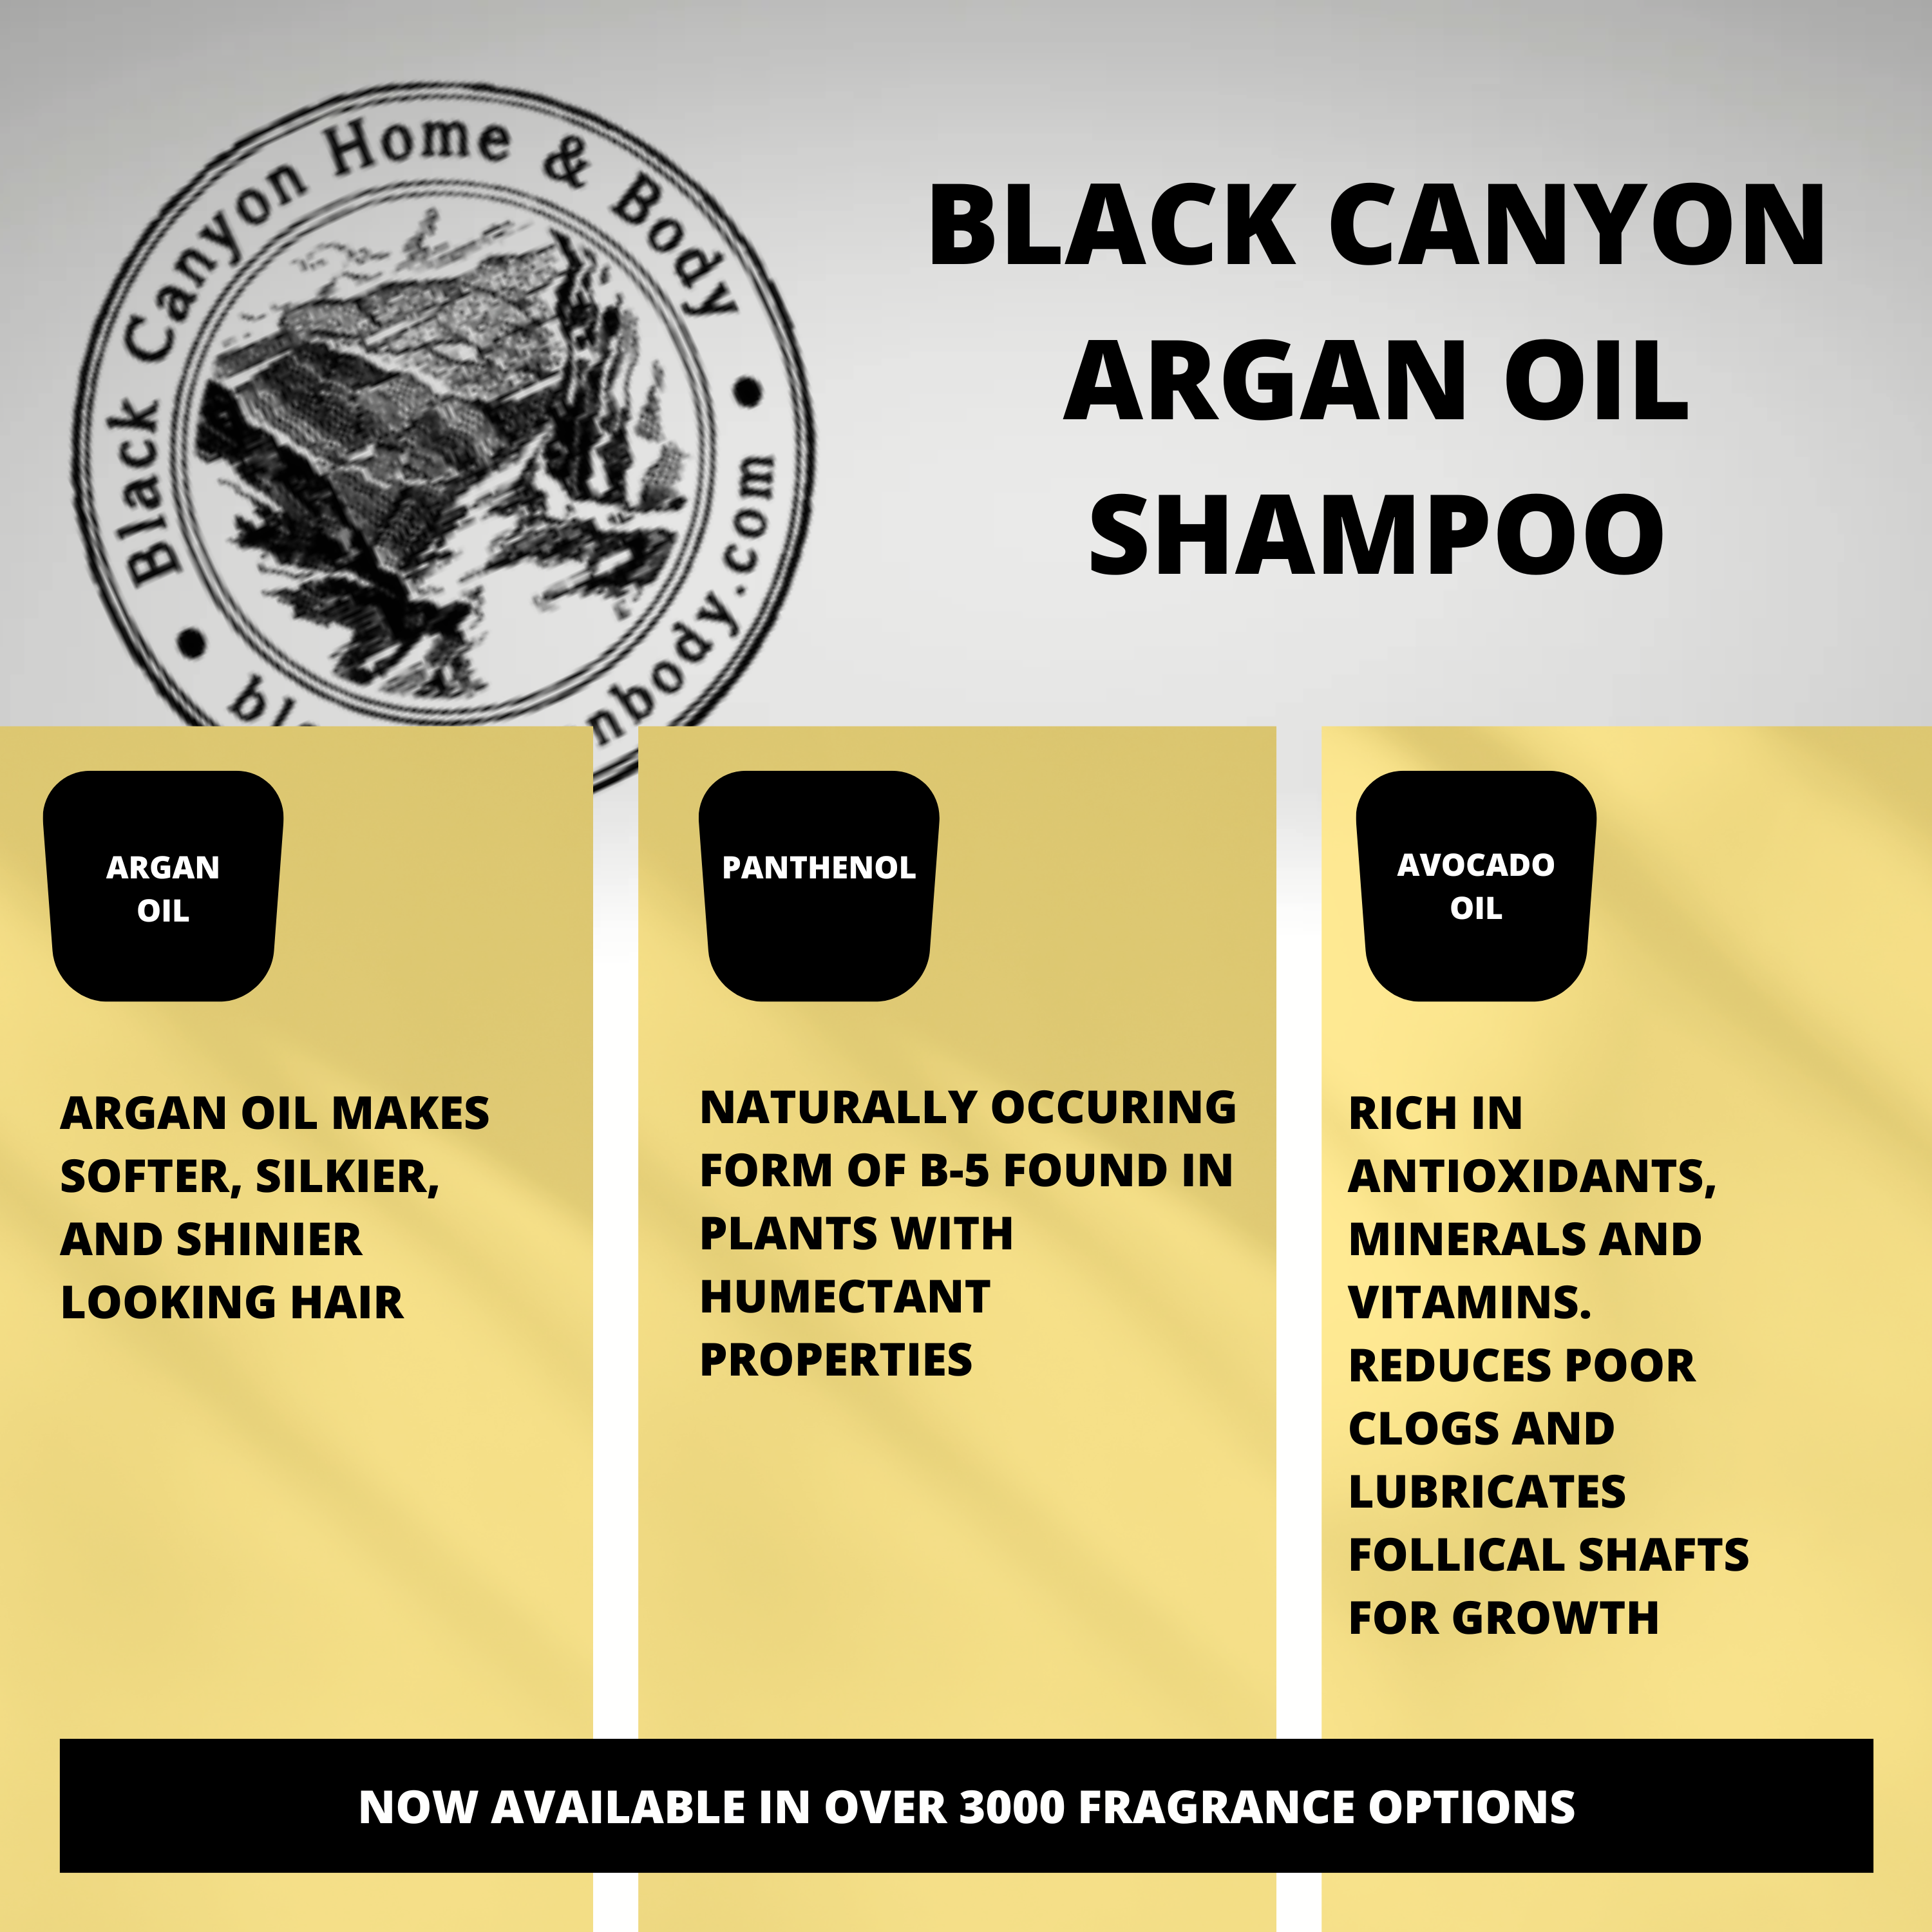 Black Canyon Berry & Orange Blossom Scented Shampoo with Argan Oil